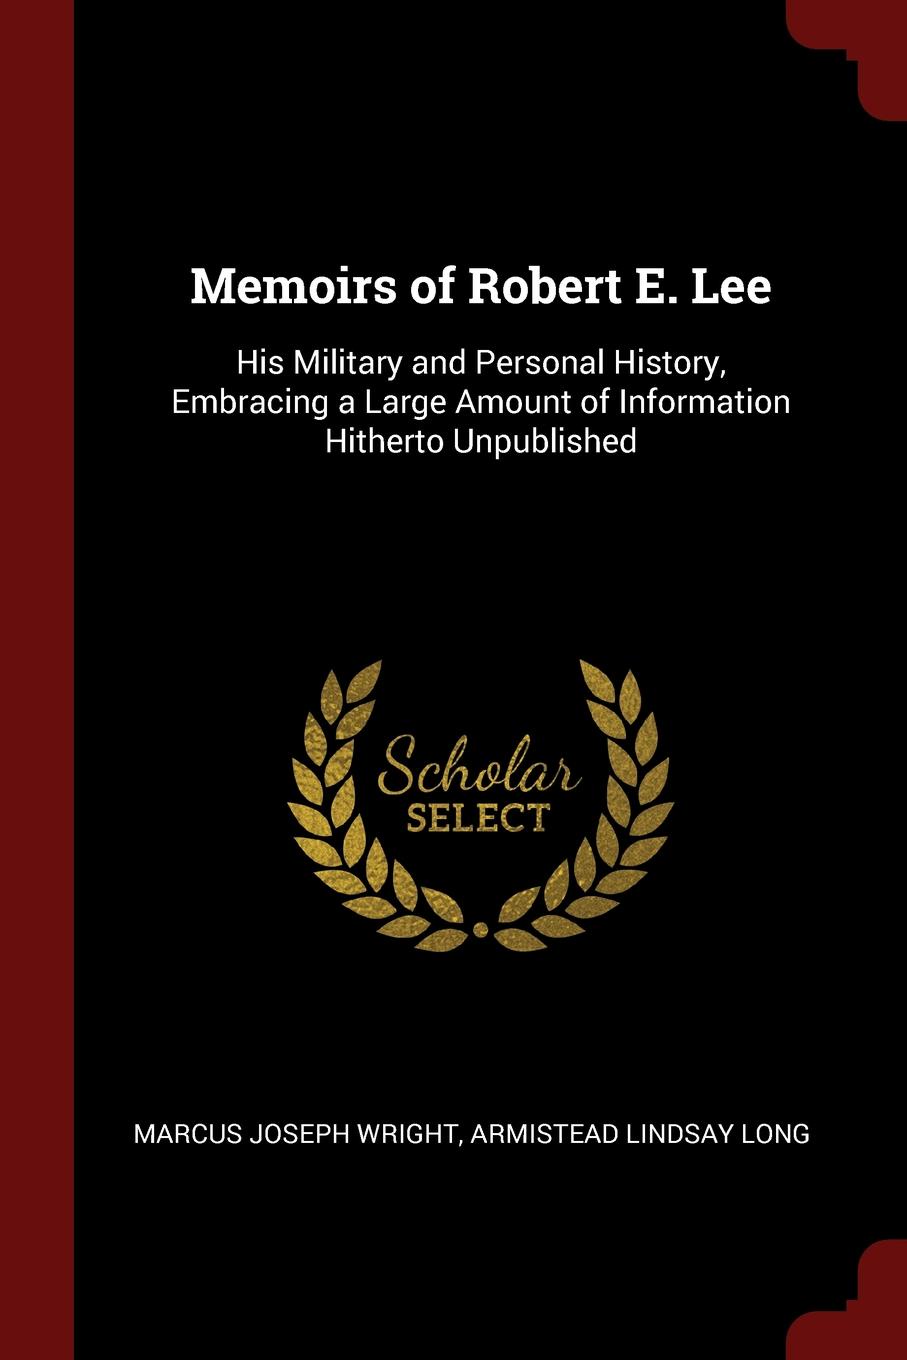 Memoirs of Robert E. Lee. His Military and Personal History, Embracing a Large Amount of Information Hitherto Unpublished